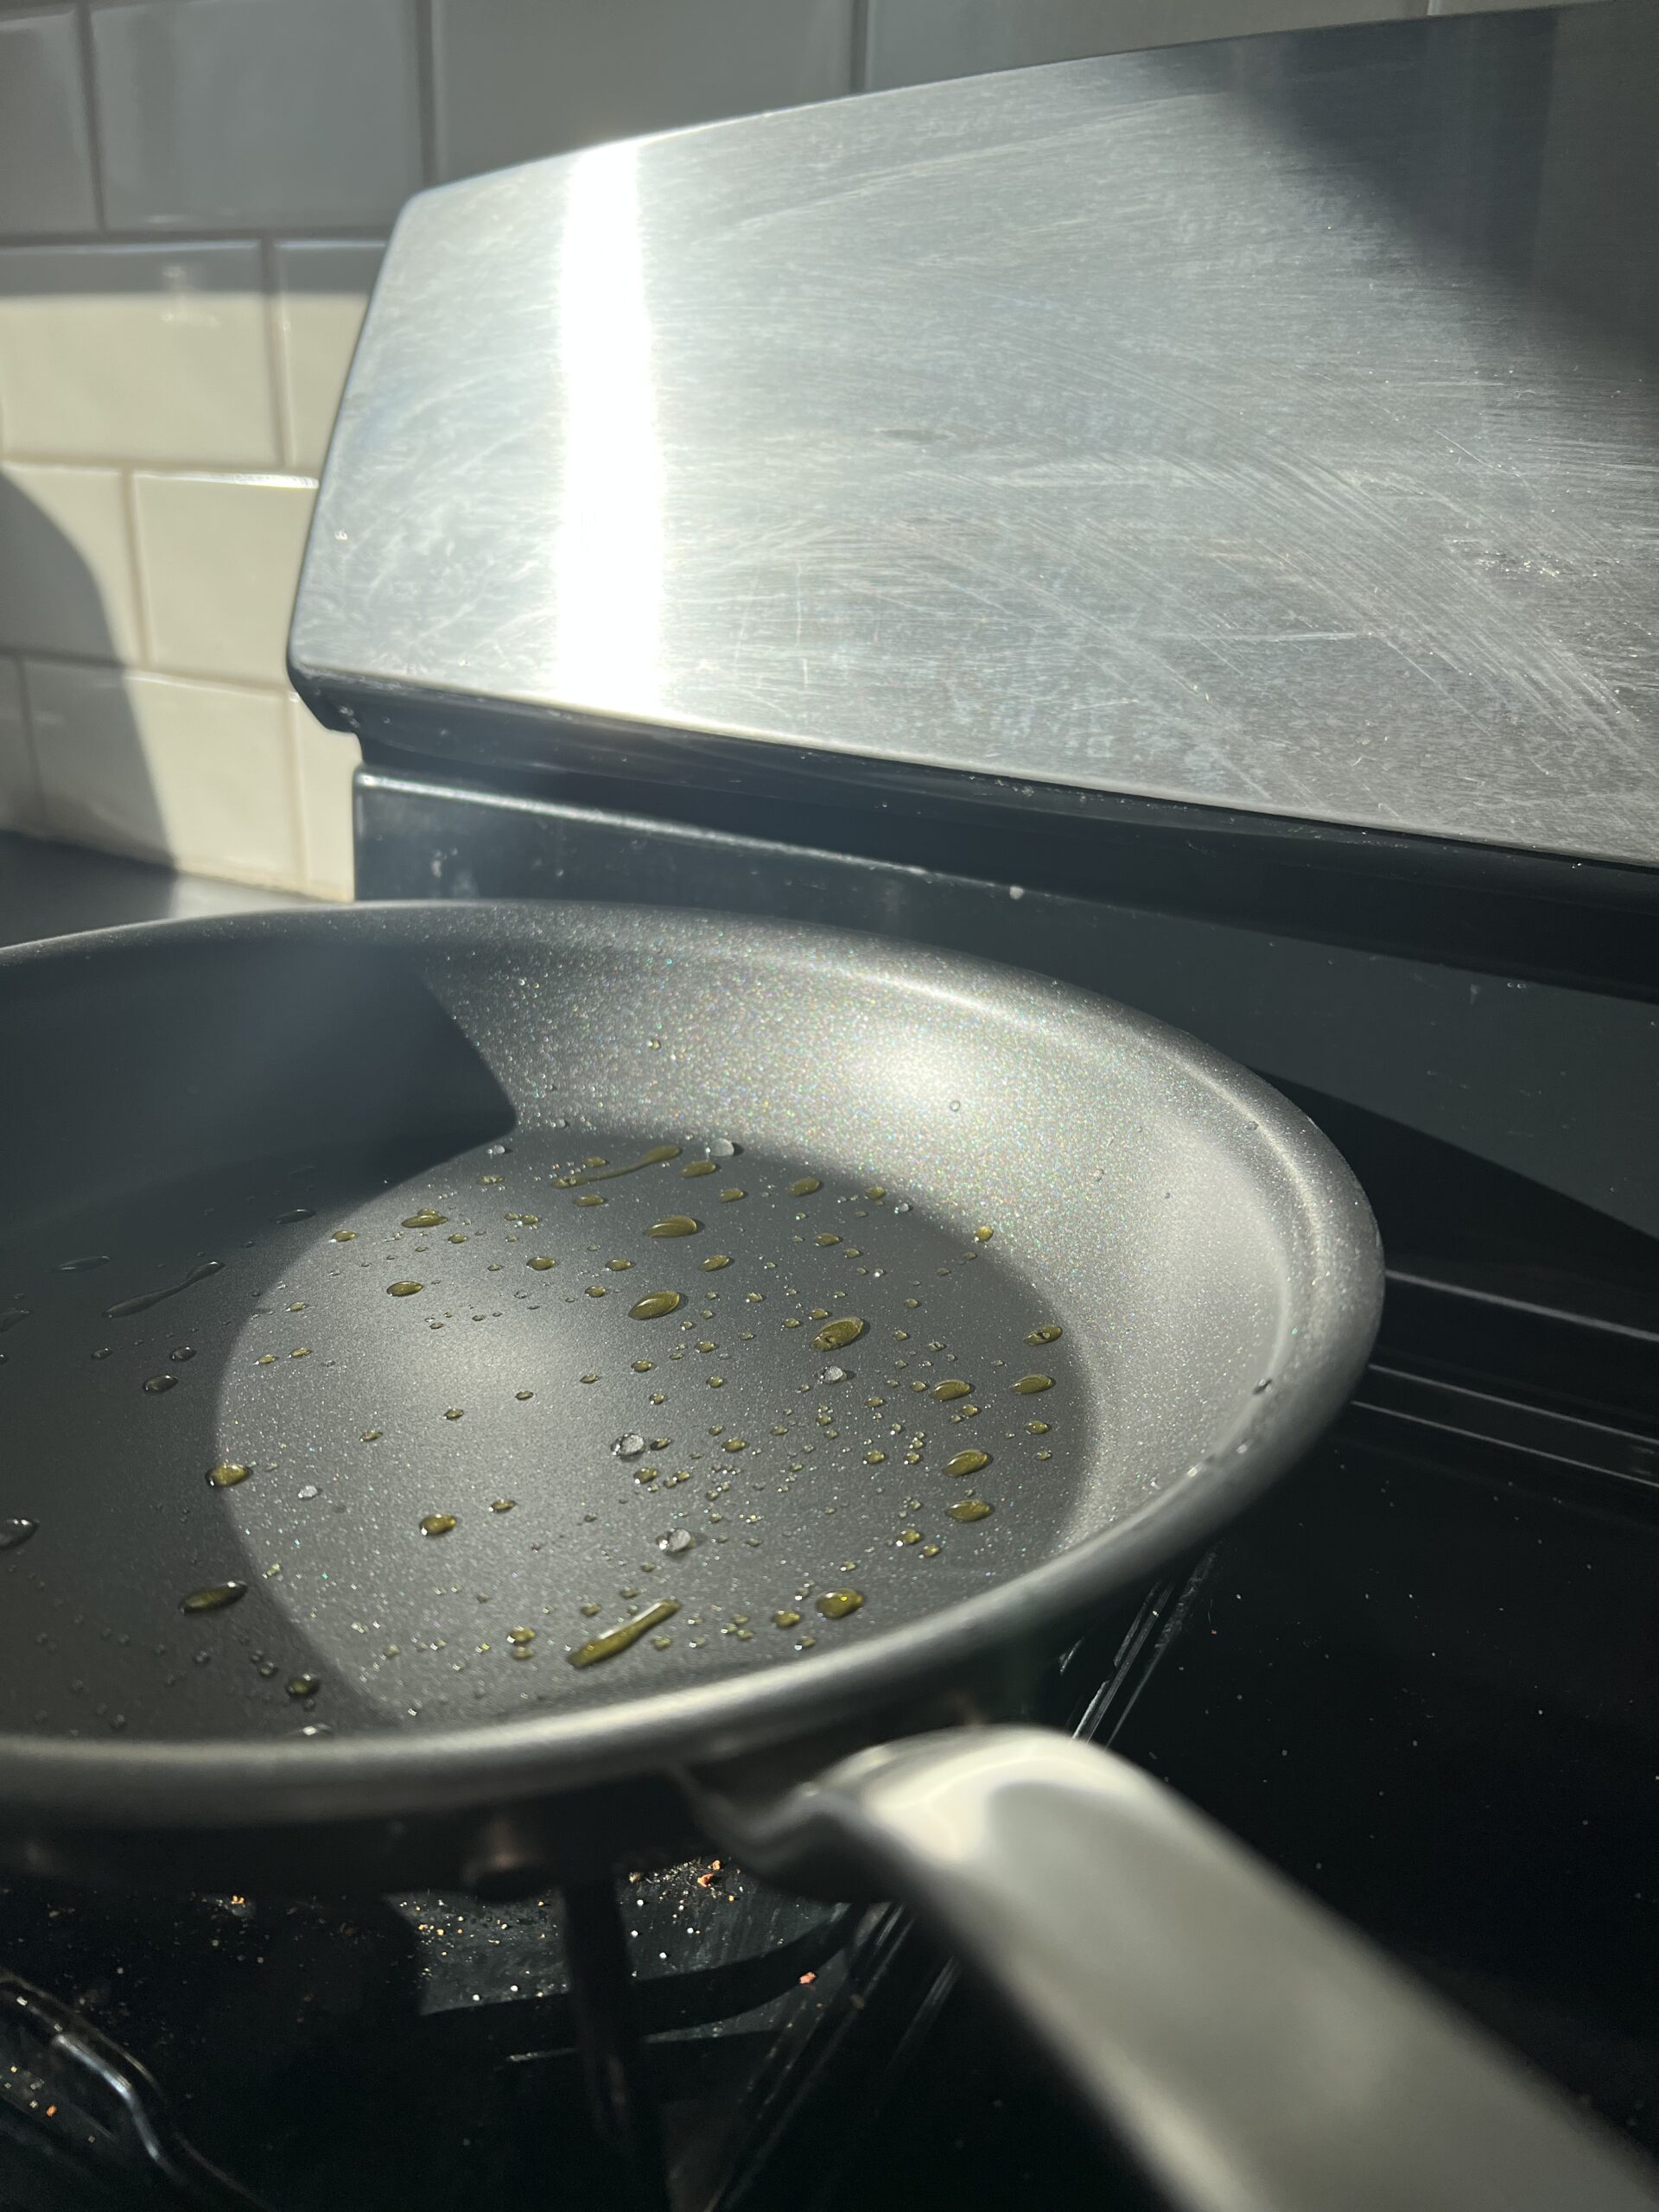 Carbon Steel Woks May Be 'Better,' but I'll Never Give Up My Nonstick Wok